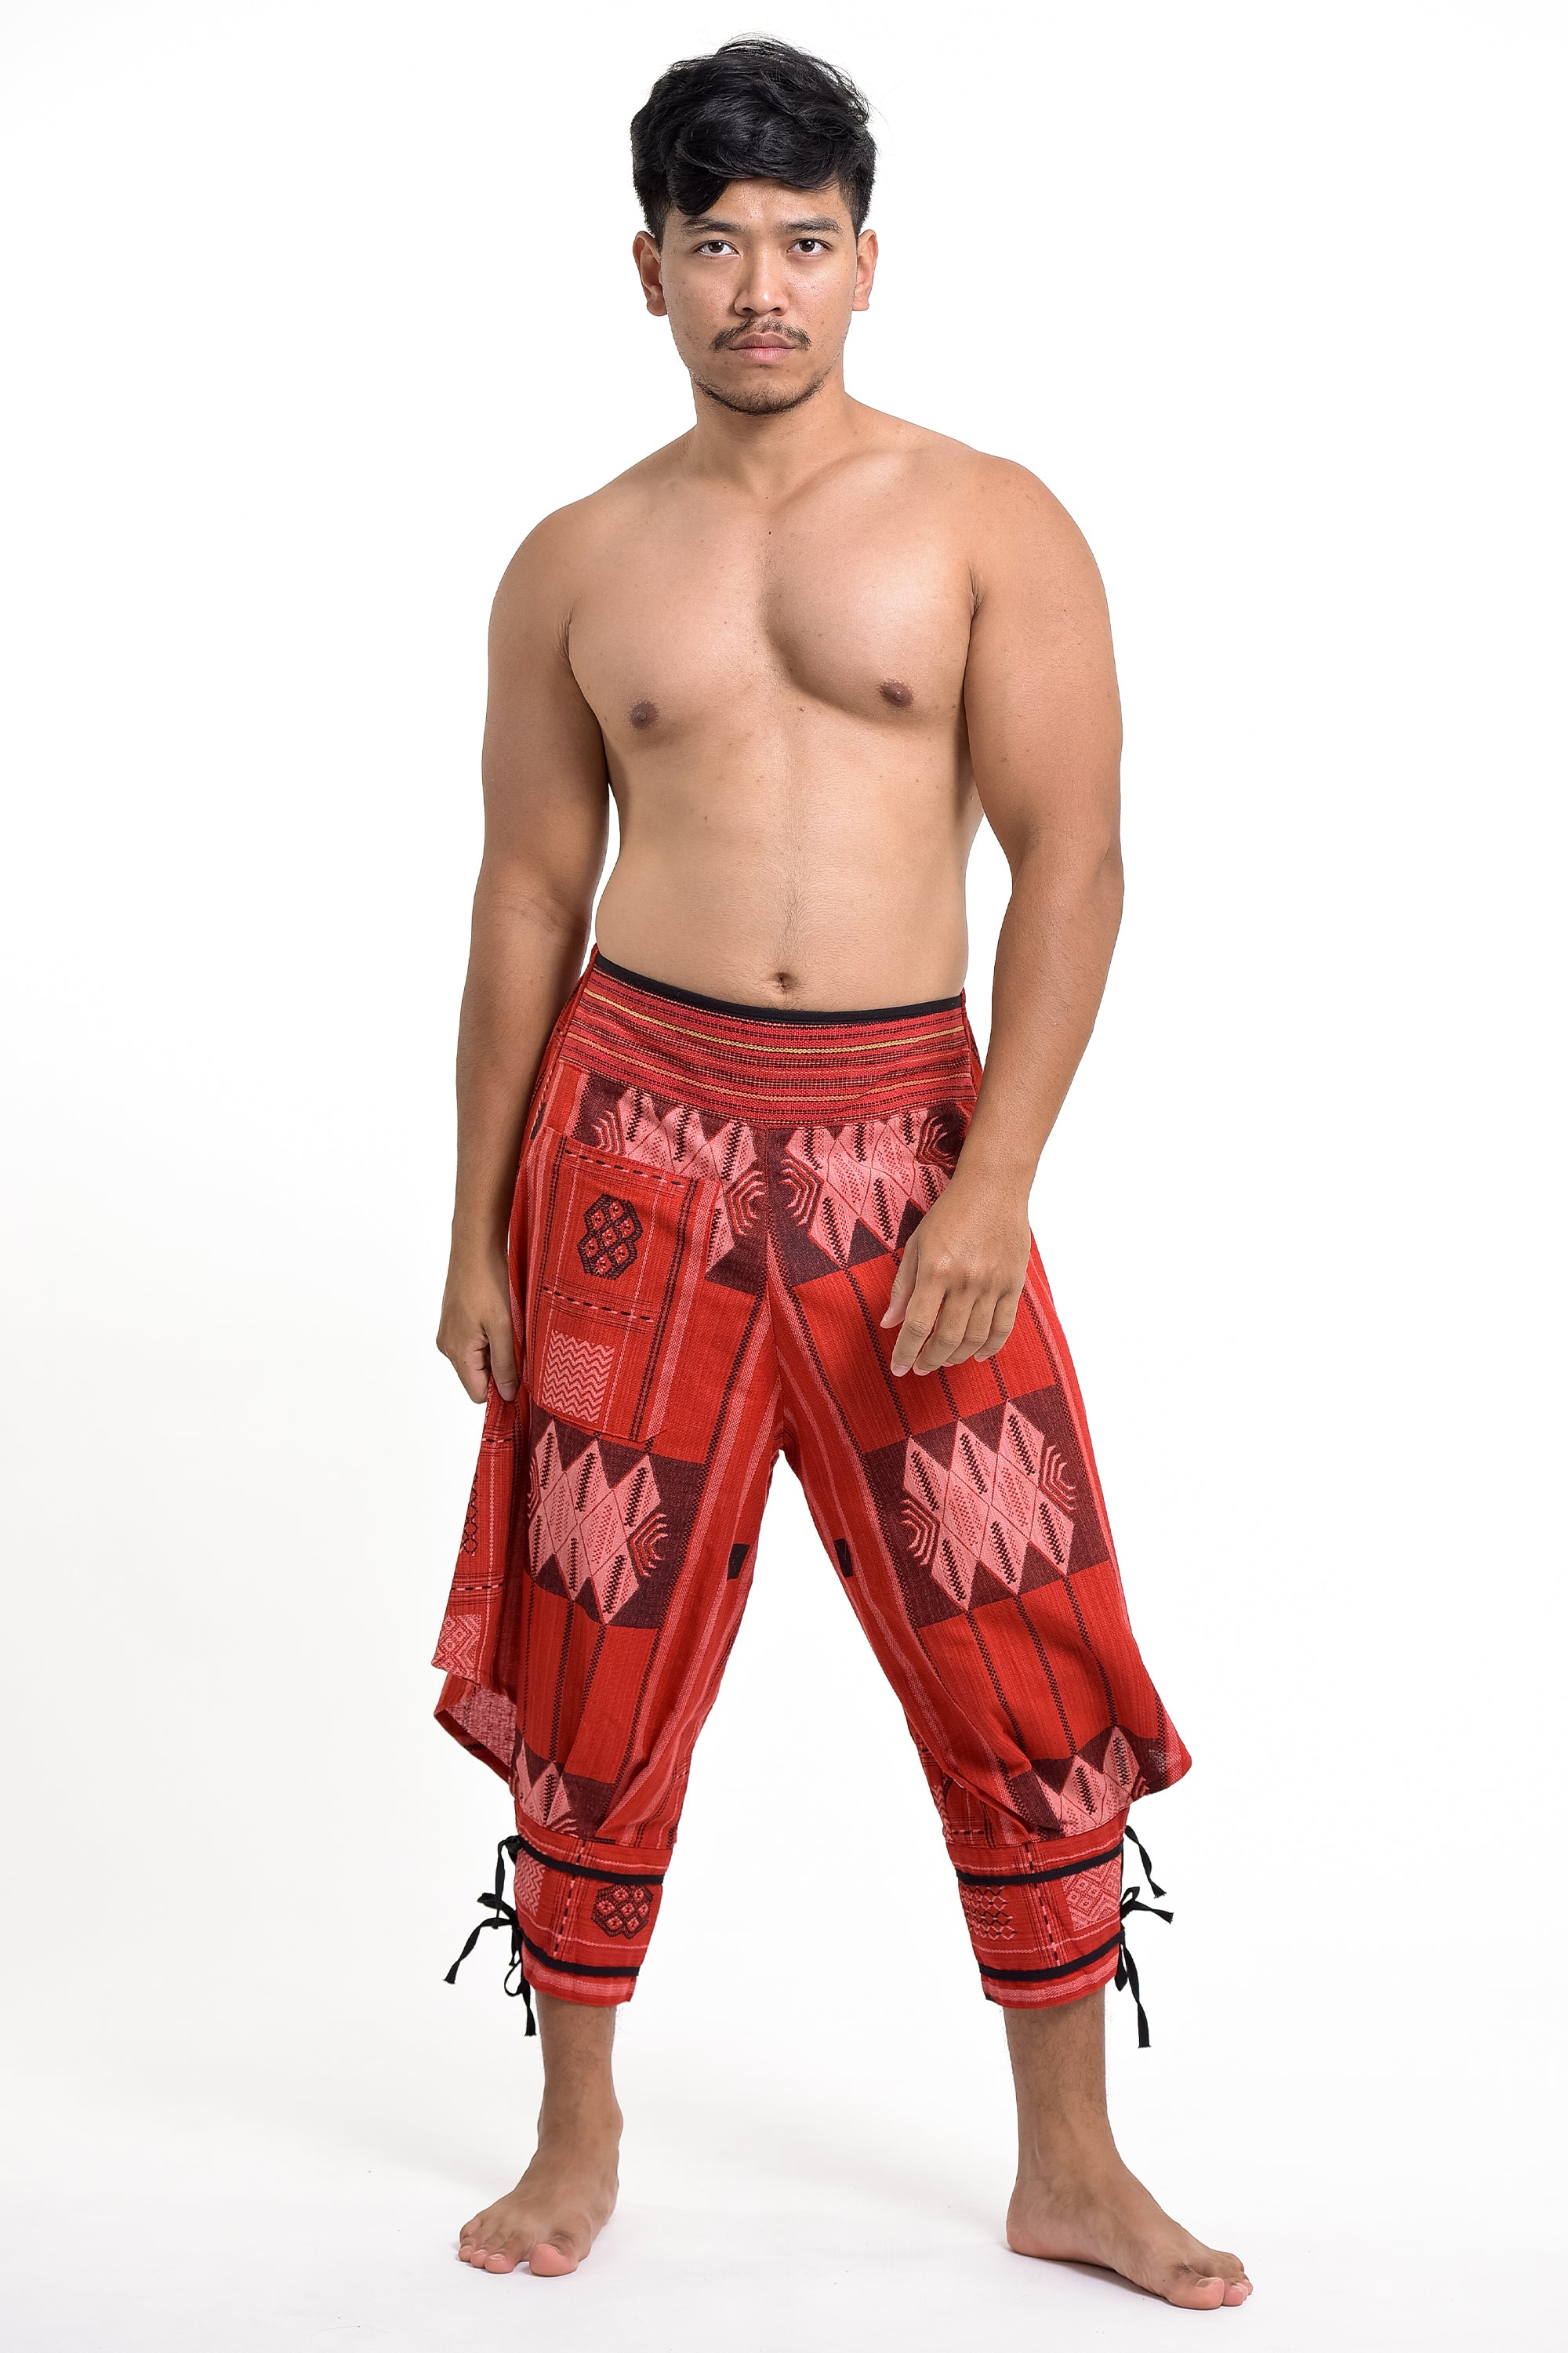 Men's Low Cut Harem Pants in Gold and Turquoise – The High Thai